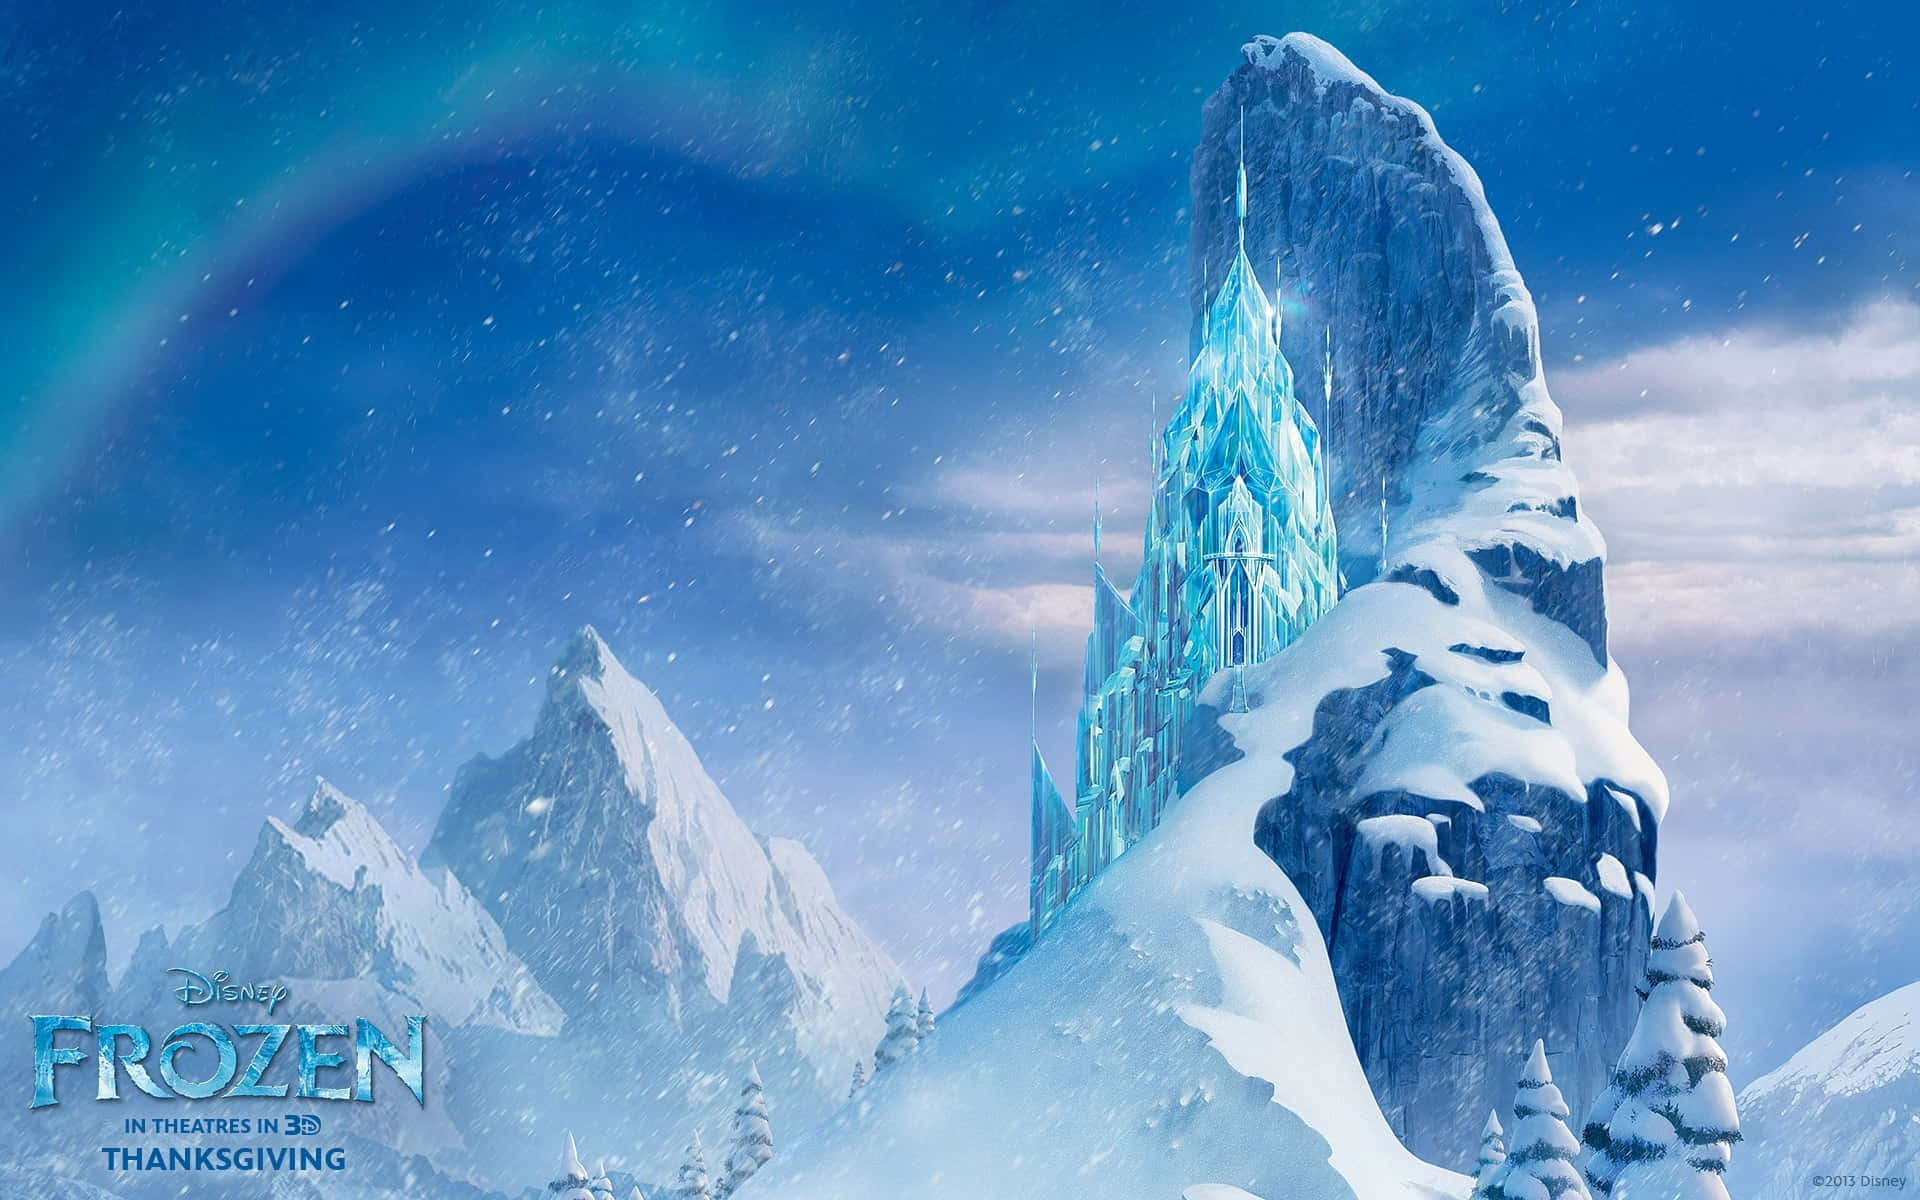 Follow Elsa and Anna on their magical journey of adventure and discovery!